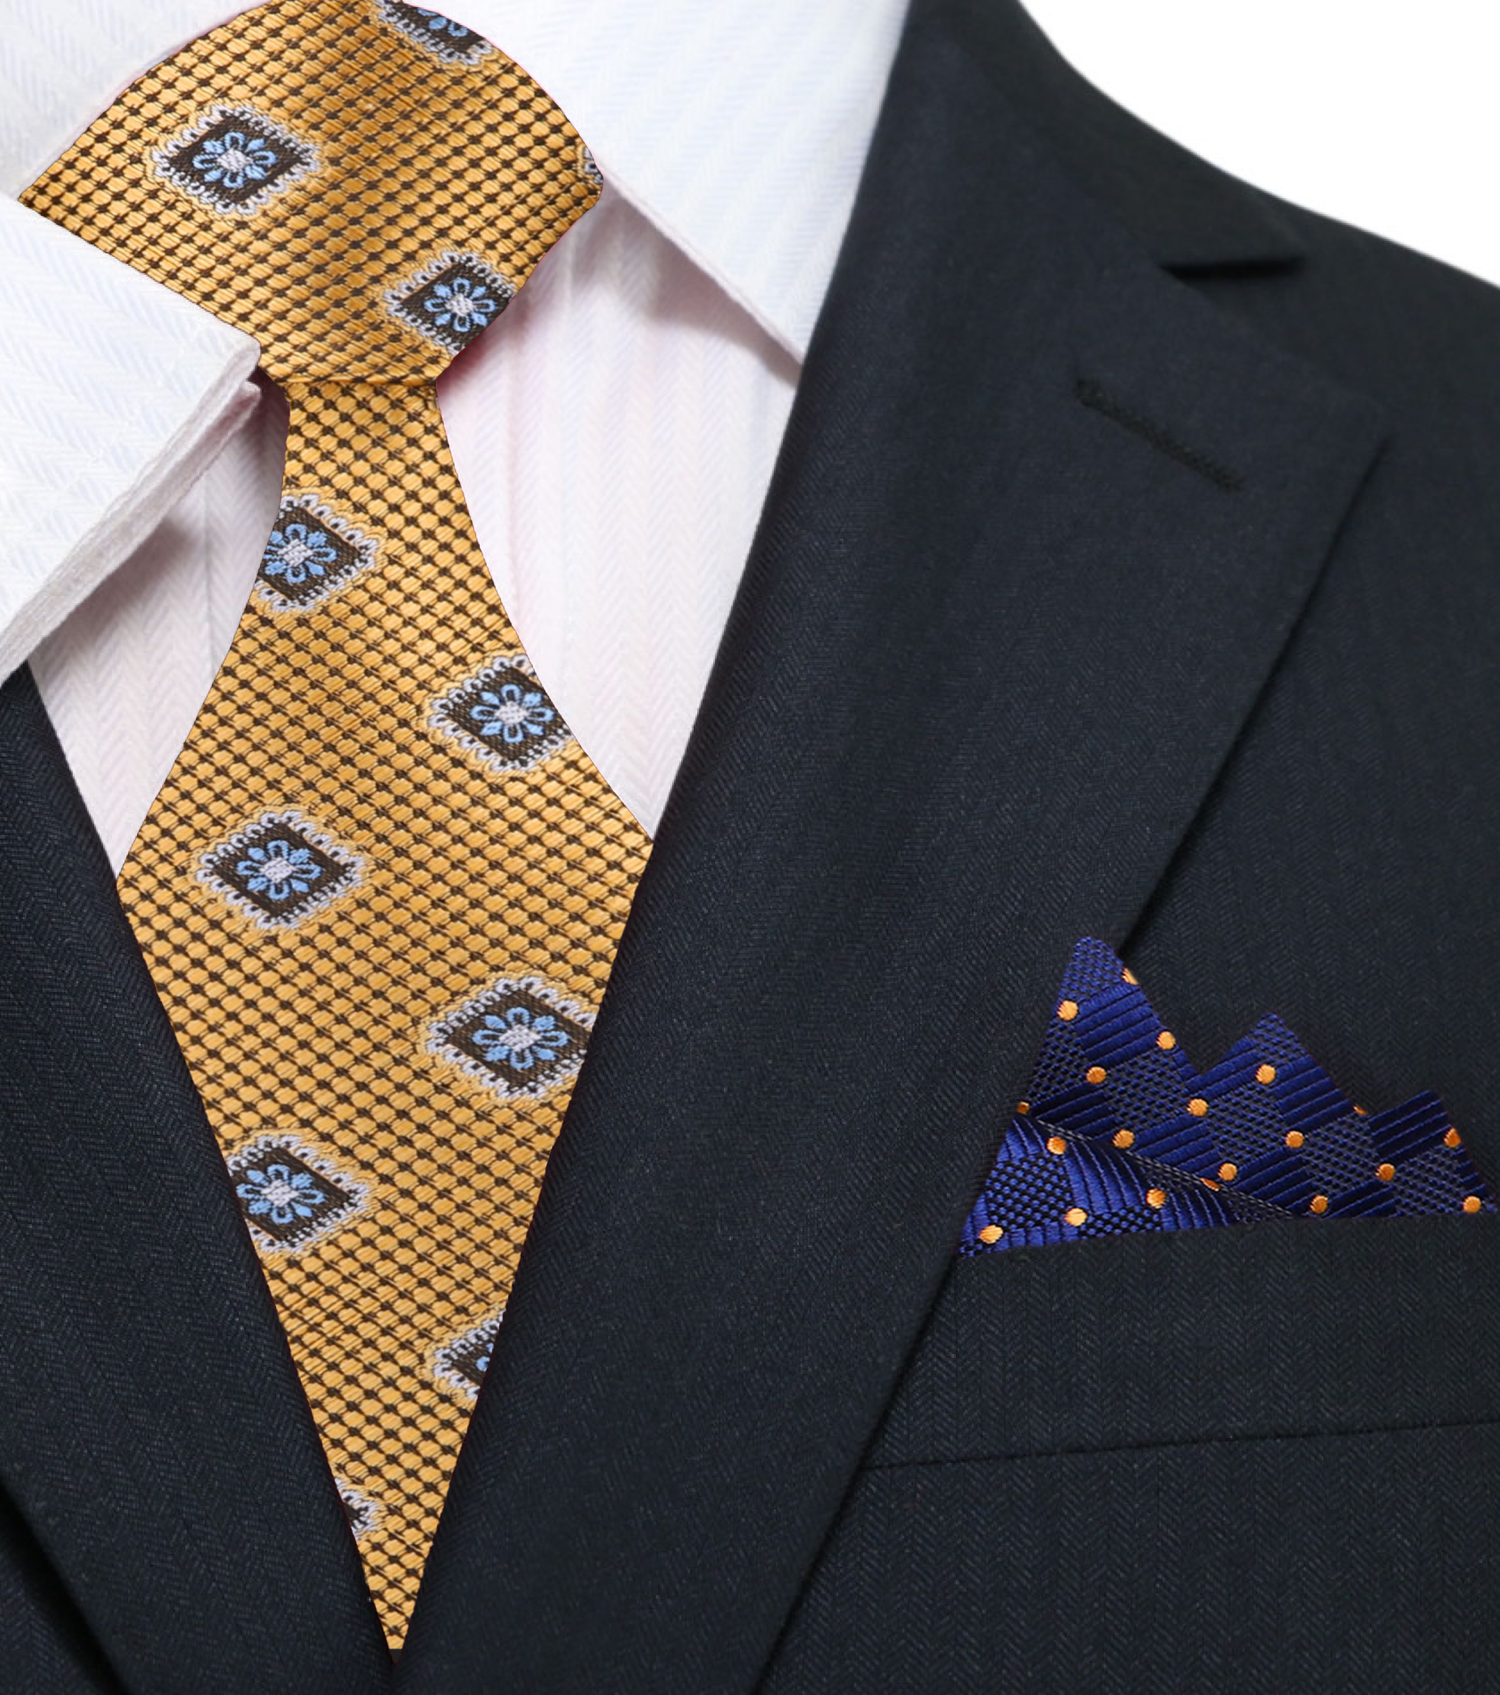 Gold Medallions Necktie and Accenting Blue and Gold Square